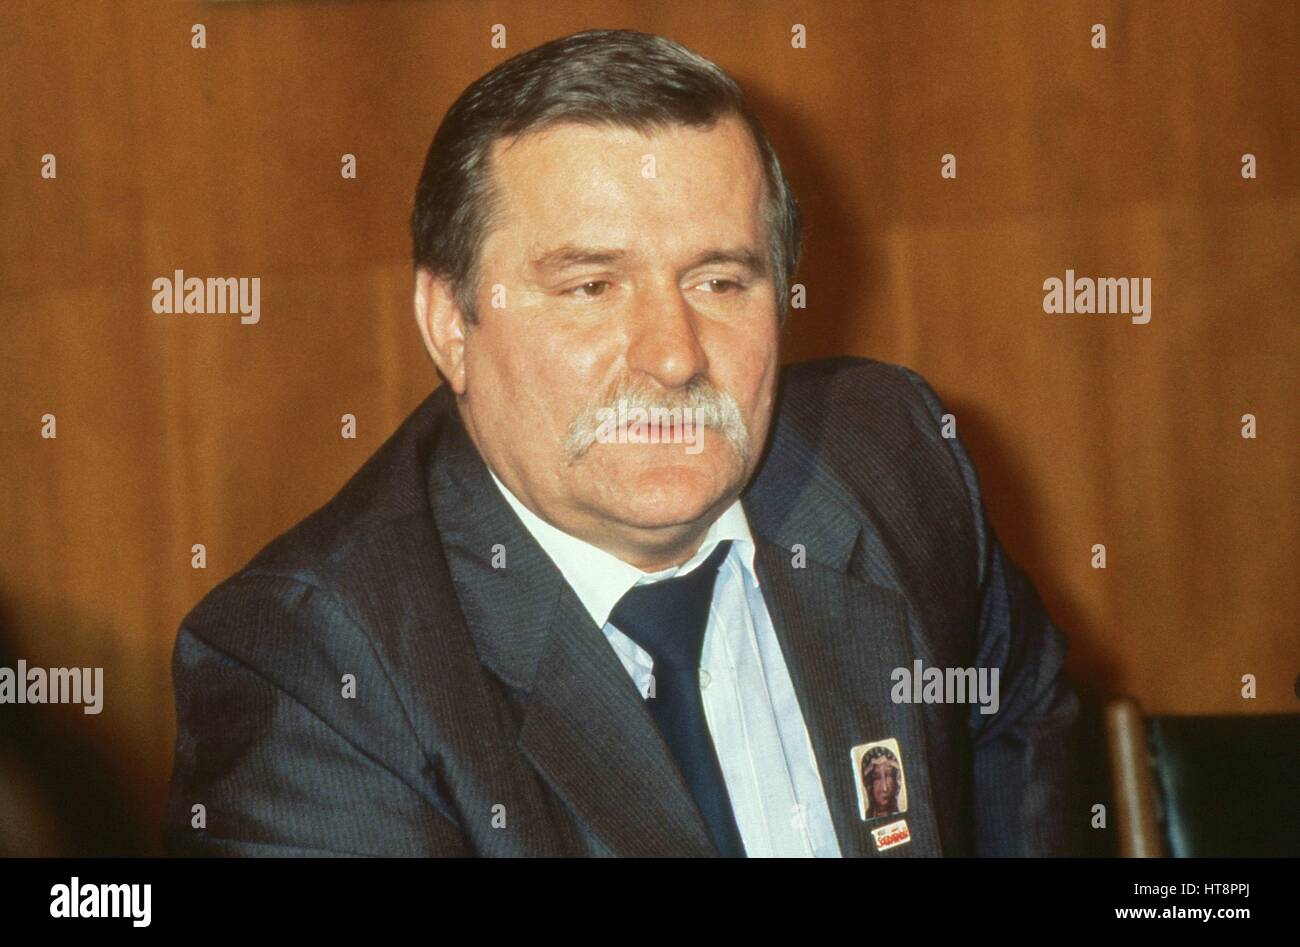 Lech Walesa, President of Poland, attends a press conference at the Trades Union Congress in London, England on November 30, 1989. Stock Photo